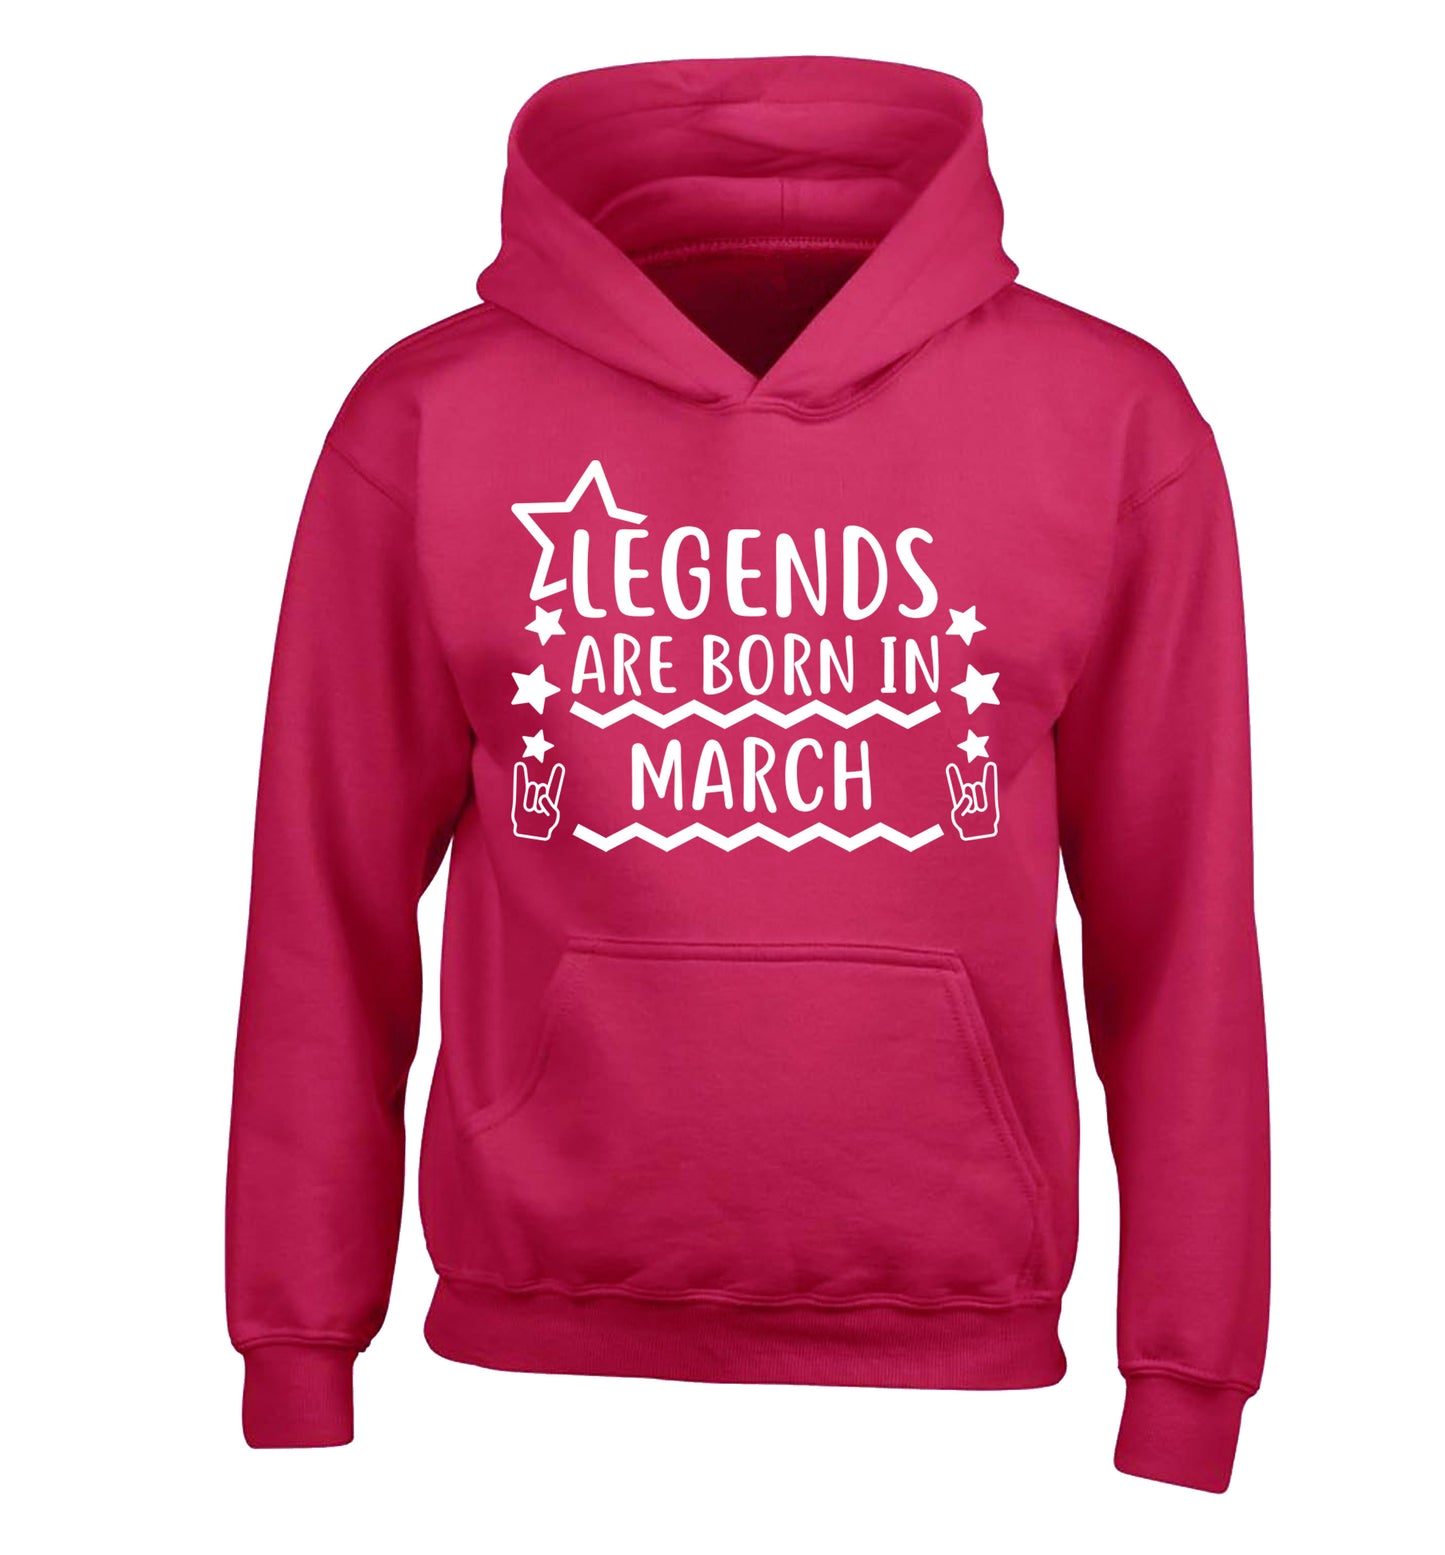 Legends are born in March children's pink hoodie 12-13 Years